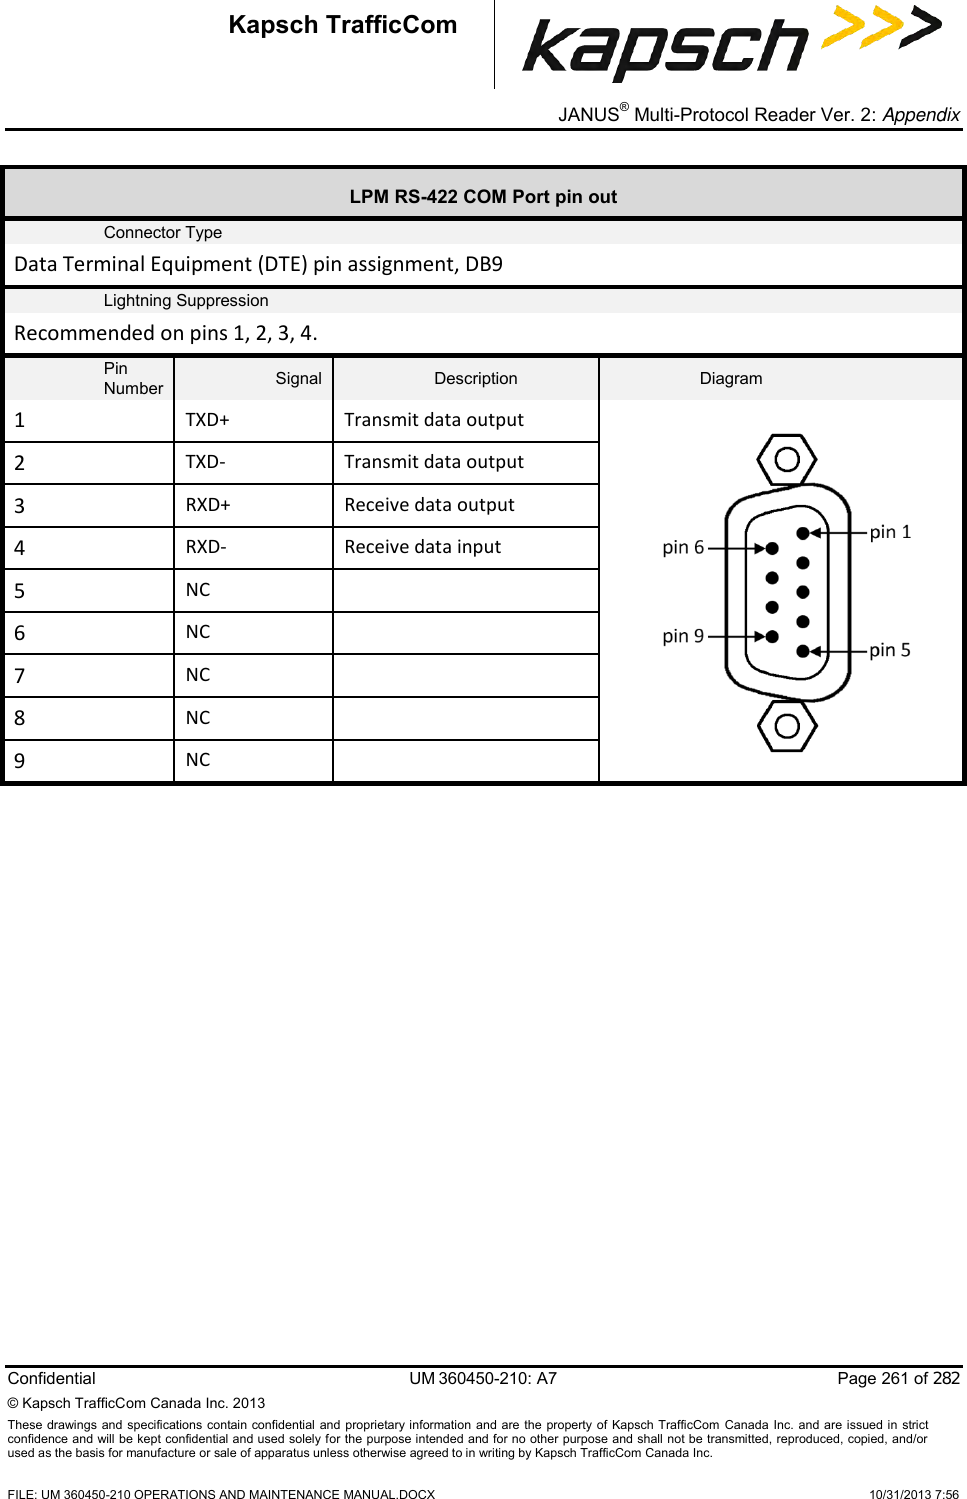 _ JANUS® Multi-Protocol Reader Ver. 2: Appendix  Confidential  UM 360450-210: A7  Page 261 of 282 © Kapsch TrafficCom Canada Inc. 2013 These  drawings and specifications contain confidential  and  proprietary information and are  the  property of Kapsch TrafficCom  Canada Inc.  and are issued in strict confidence and will be kept confidential and used solely for the purpose intended and for no other purpose and shall not be transmitted, reproduced, copied, and/or used as the basis for manufacture or sale of apparatus unless otherwise agreed to in writing by Kapsch TrafficCom Canada Inc.    FILE: UM 360450-210 OPERATIONS AND MAINTENANCE MANUAL.DOCX    10/31/2013 7:56 Kapsch TrafficCom LPM RS-422 COM Port pin out Connector Type Data Terminal Equipment (DTE) pin assignment, DB9  Lightning Suppression Recommended on pins 1, 2, 3, 4. Pin Number Signal Description Diagram 1 TXD+ Transmit data output  2 TXD- Transmit data output 3 RXD+ Receive data output 4 RXD- Receive data input 5 NC  6 NC  7 NC  8 NC  9 NC           